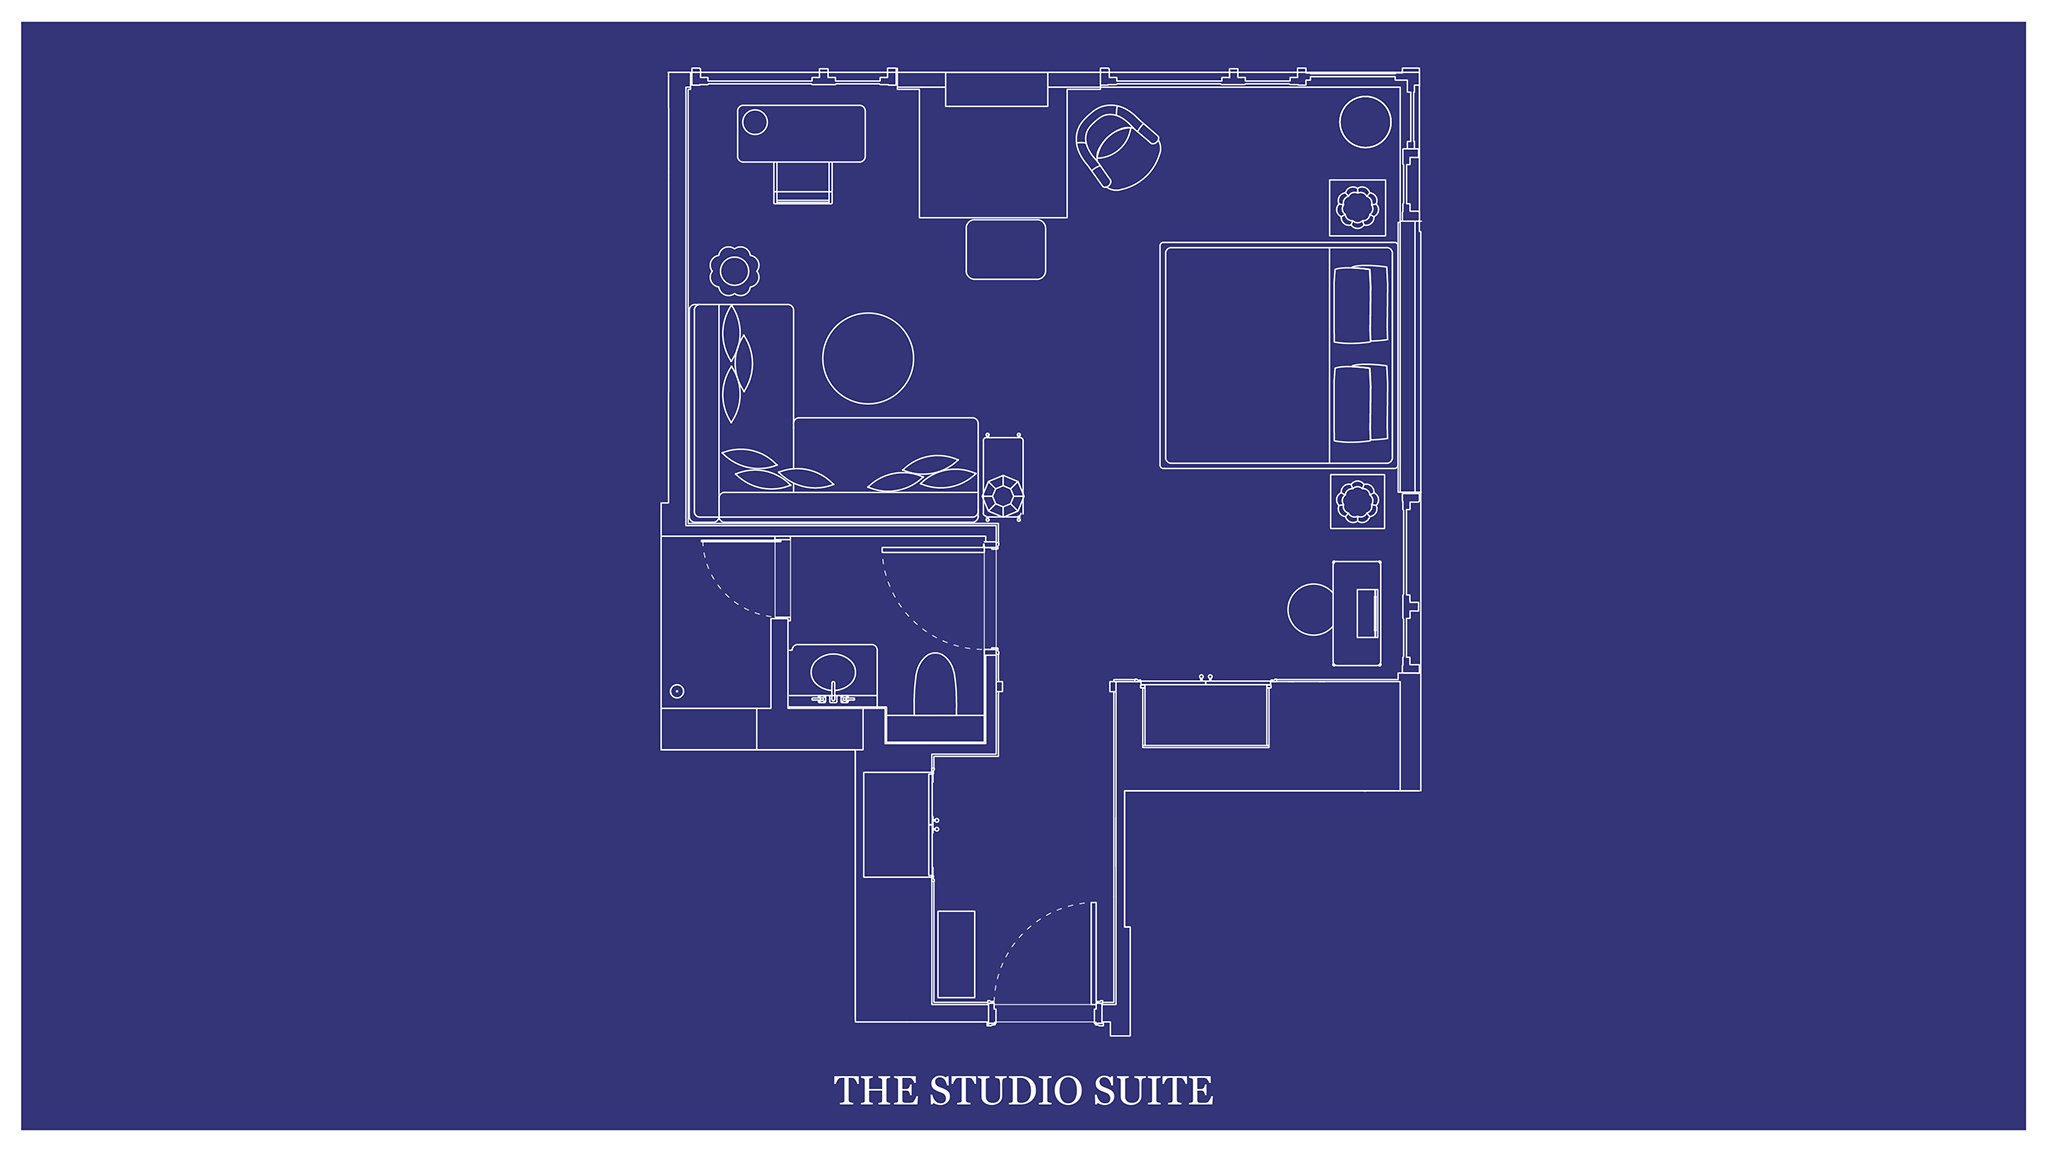 The architectural layout of "THE STUDIO SUITE" is depicted on a blueprint map.